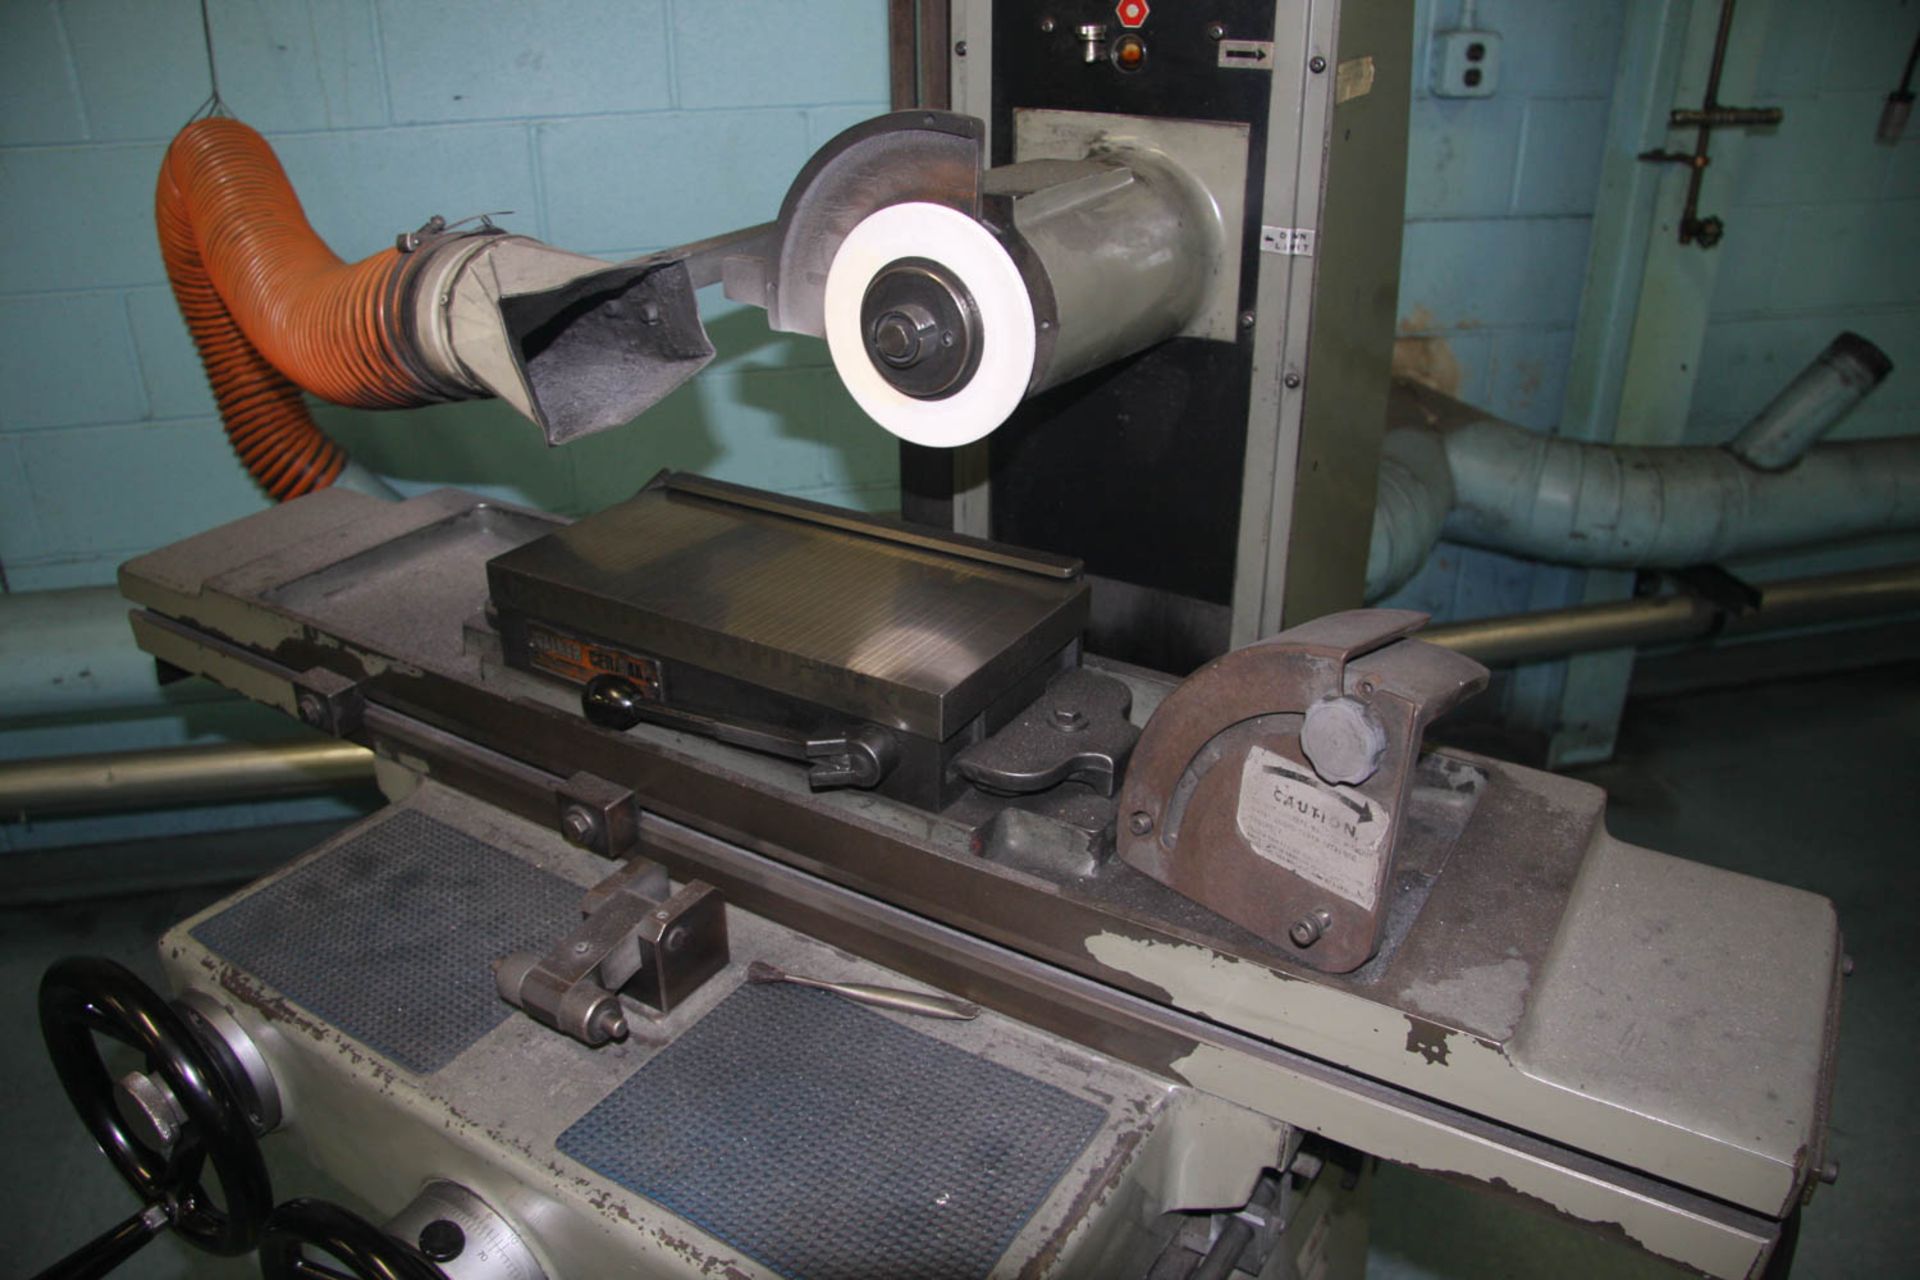 6" X 12" MITSUI MSG-200MH HAND FEED SURFACE GRINDER, 1kw, PERMANENT MAGNETIC CHUCK, S/N: - Image 2 of 4